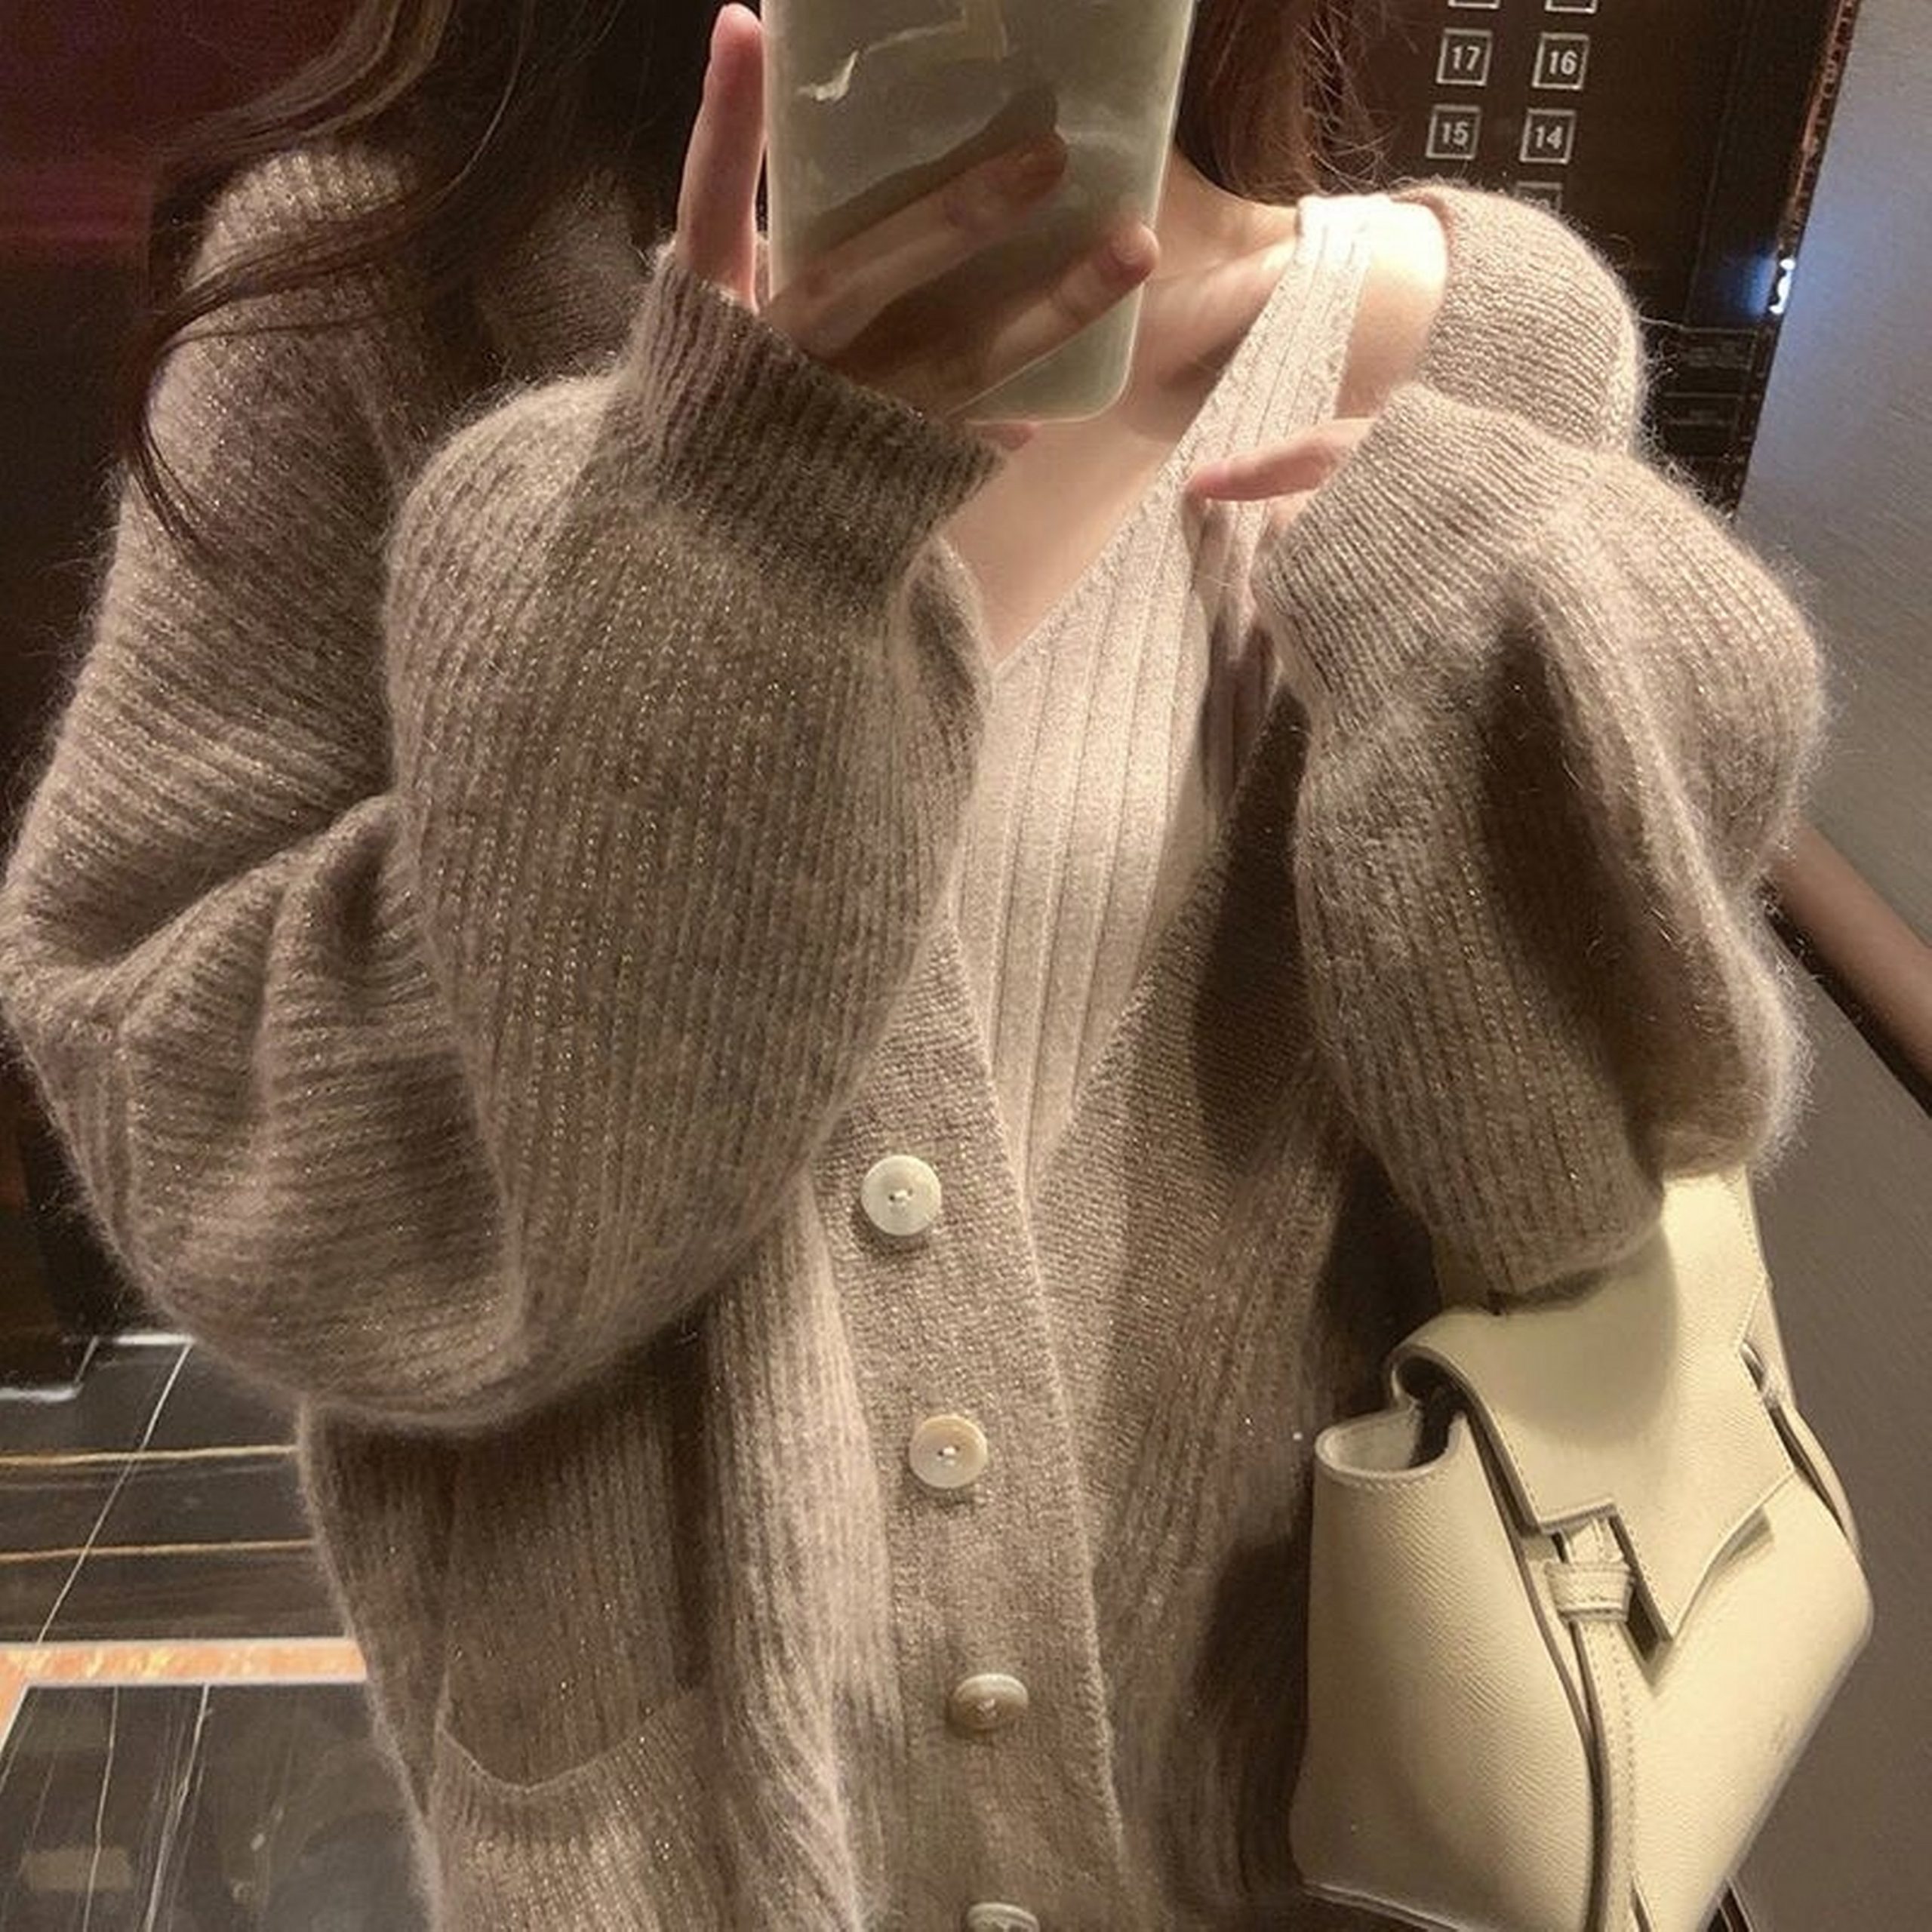 Staple Warm Soft Knit Cozy Comfy Button Cardigan With Pockets Retro Vintage Trends Cute Aesthetic Fashion